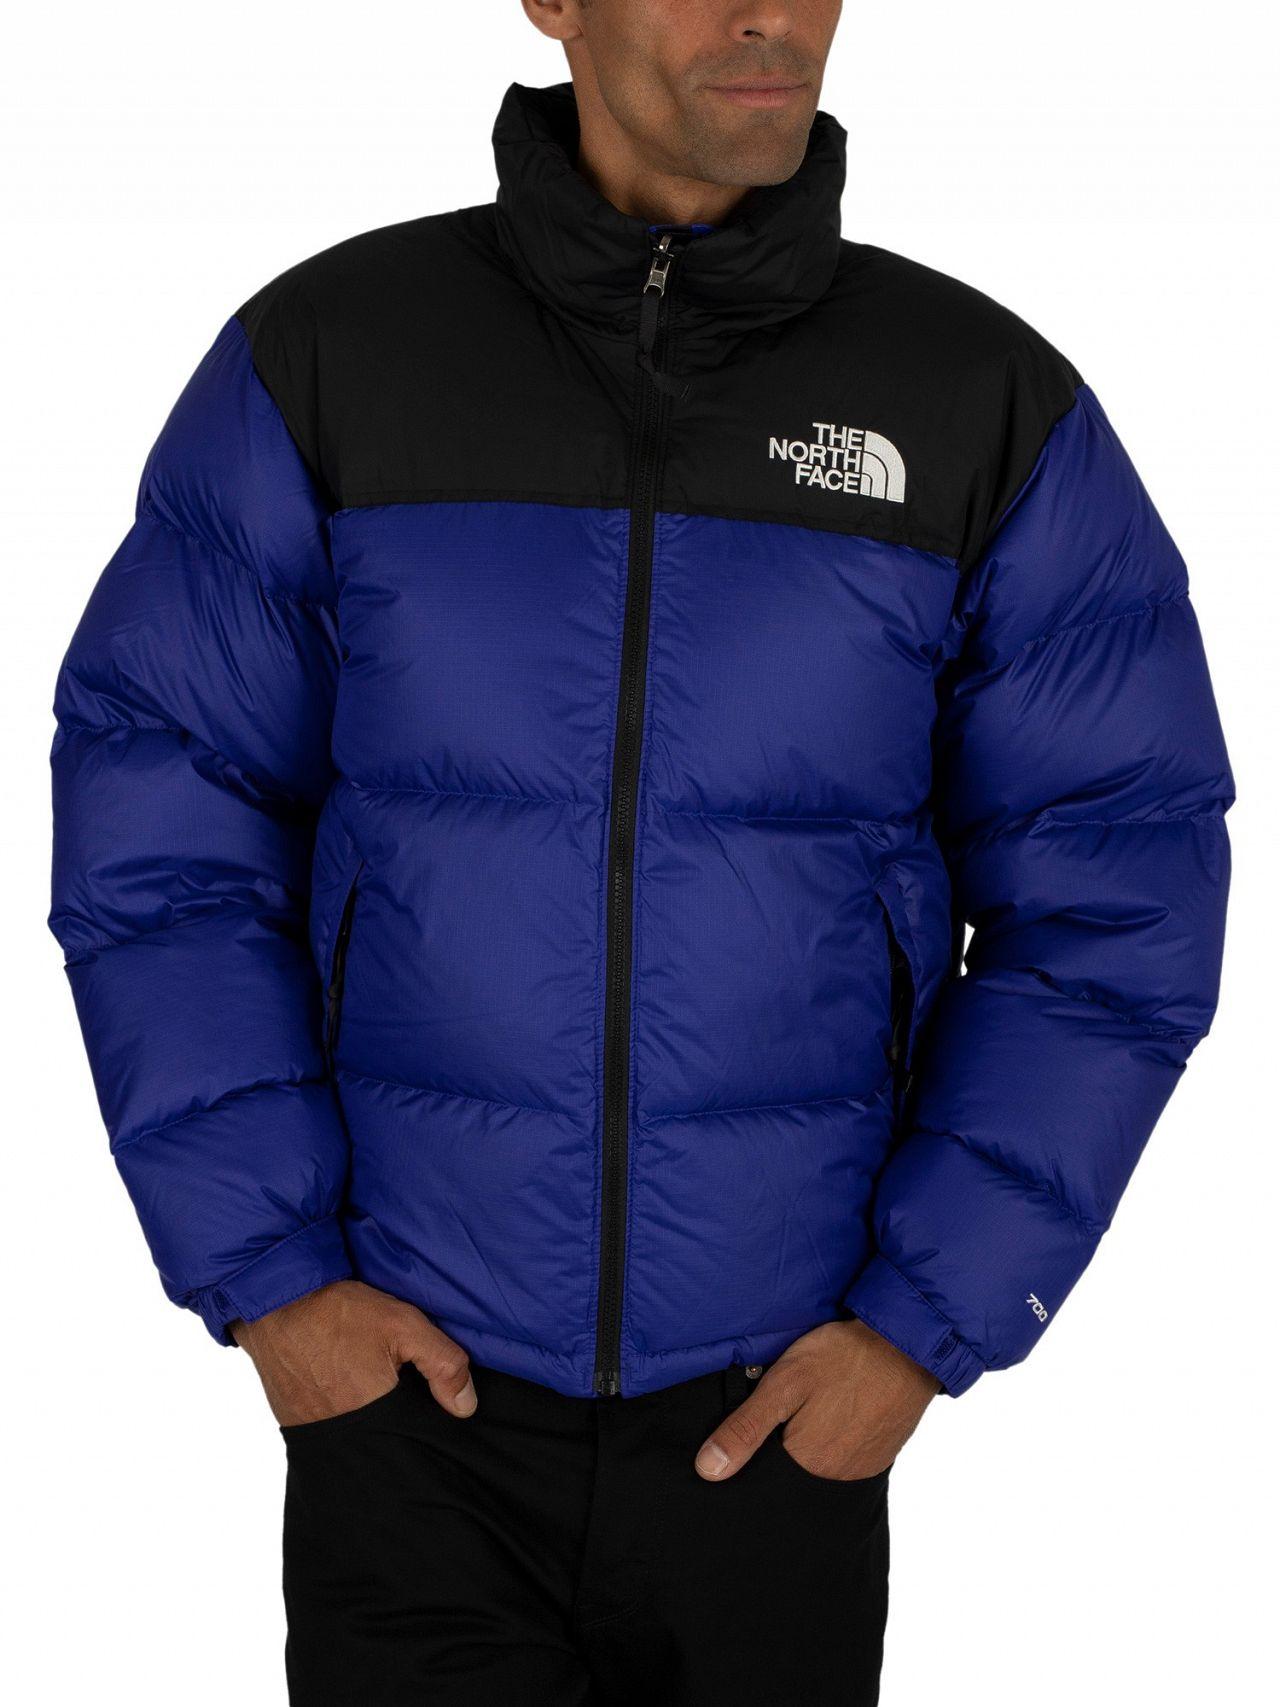 The North Face Synthetic Aztec Blue 1996 Retro Nuptse Jacket for Men - Lyst